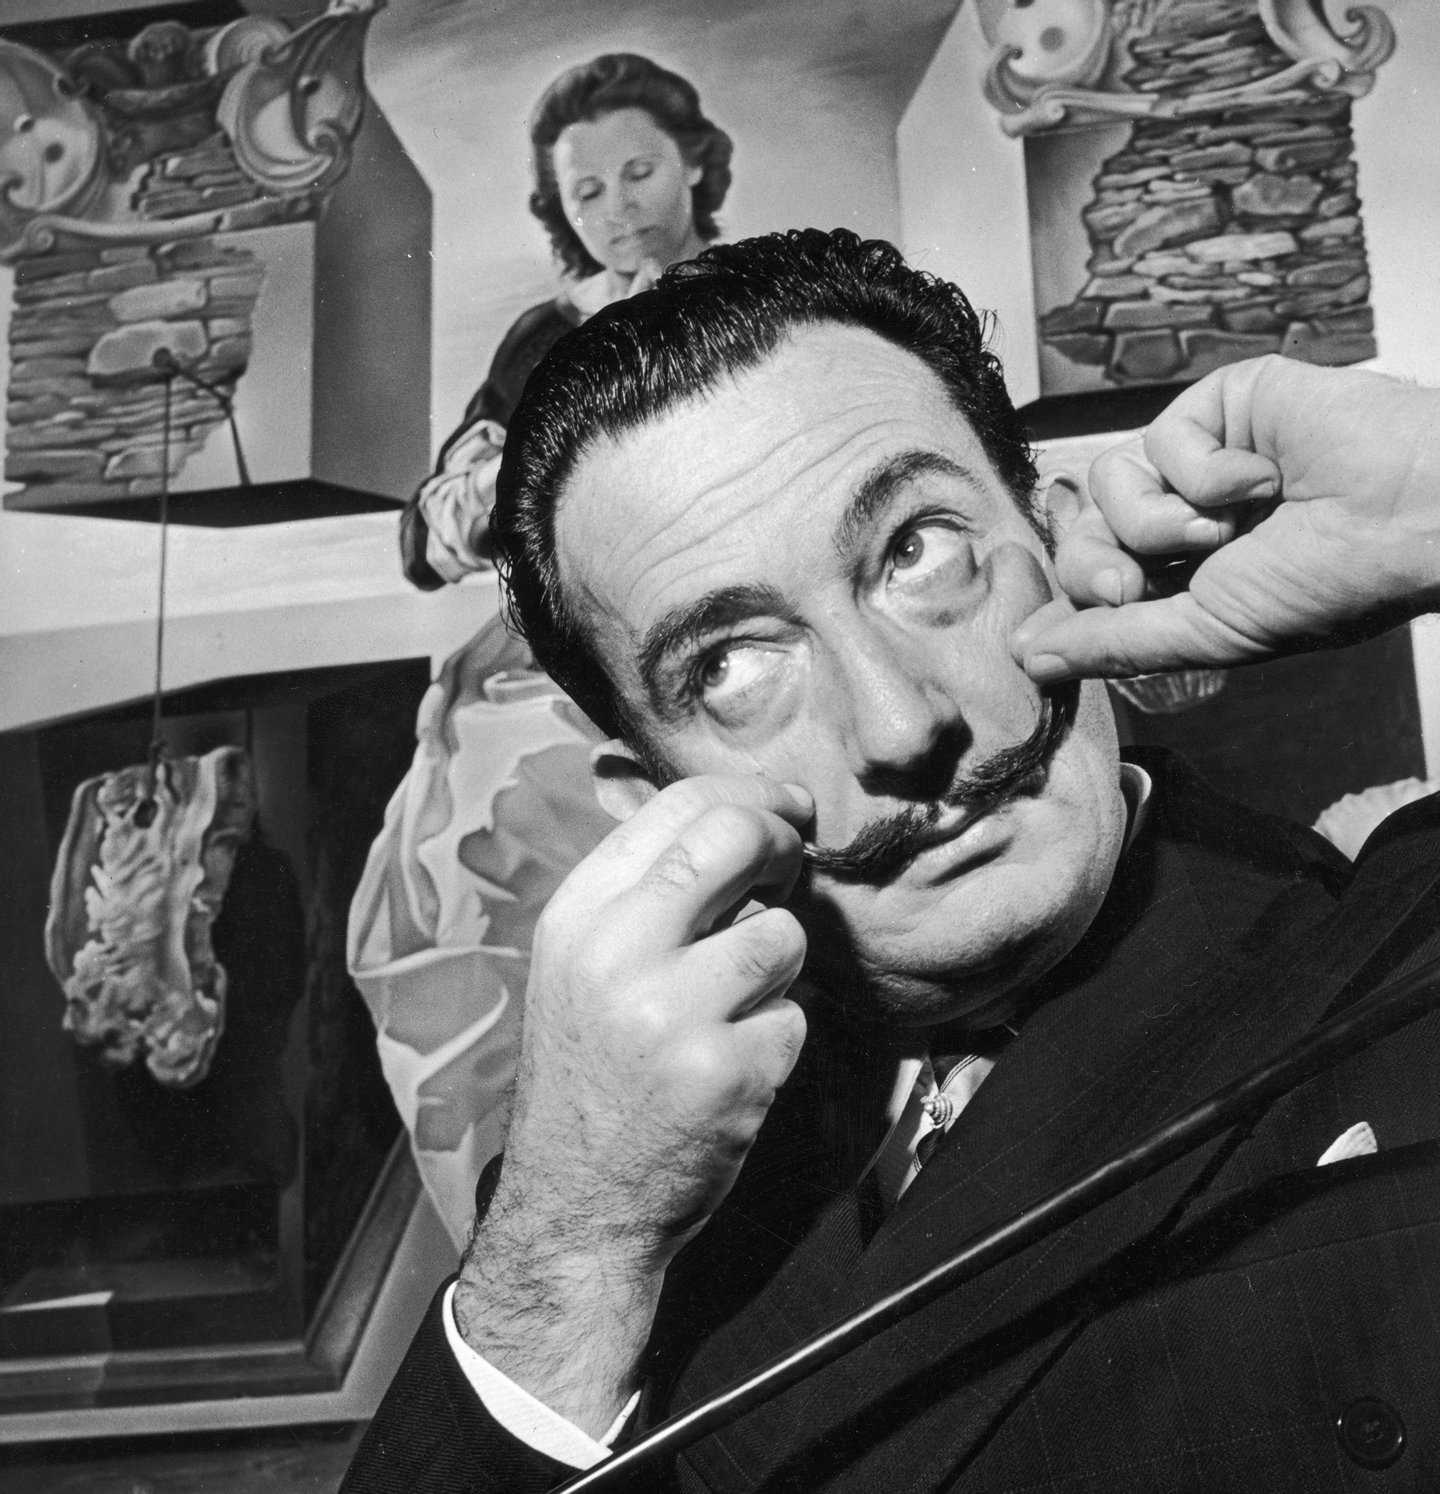 Spanish surrealist artist Salvador Dali (1904 - 1989) in London with one of his paintings entitled 'The Madonna of Port Lligat', December 1951. (Photo by George Konig/Keystone Features/Getty Images)